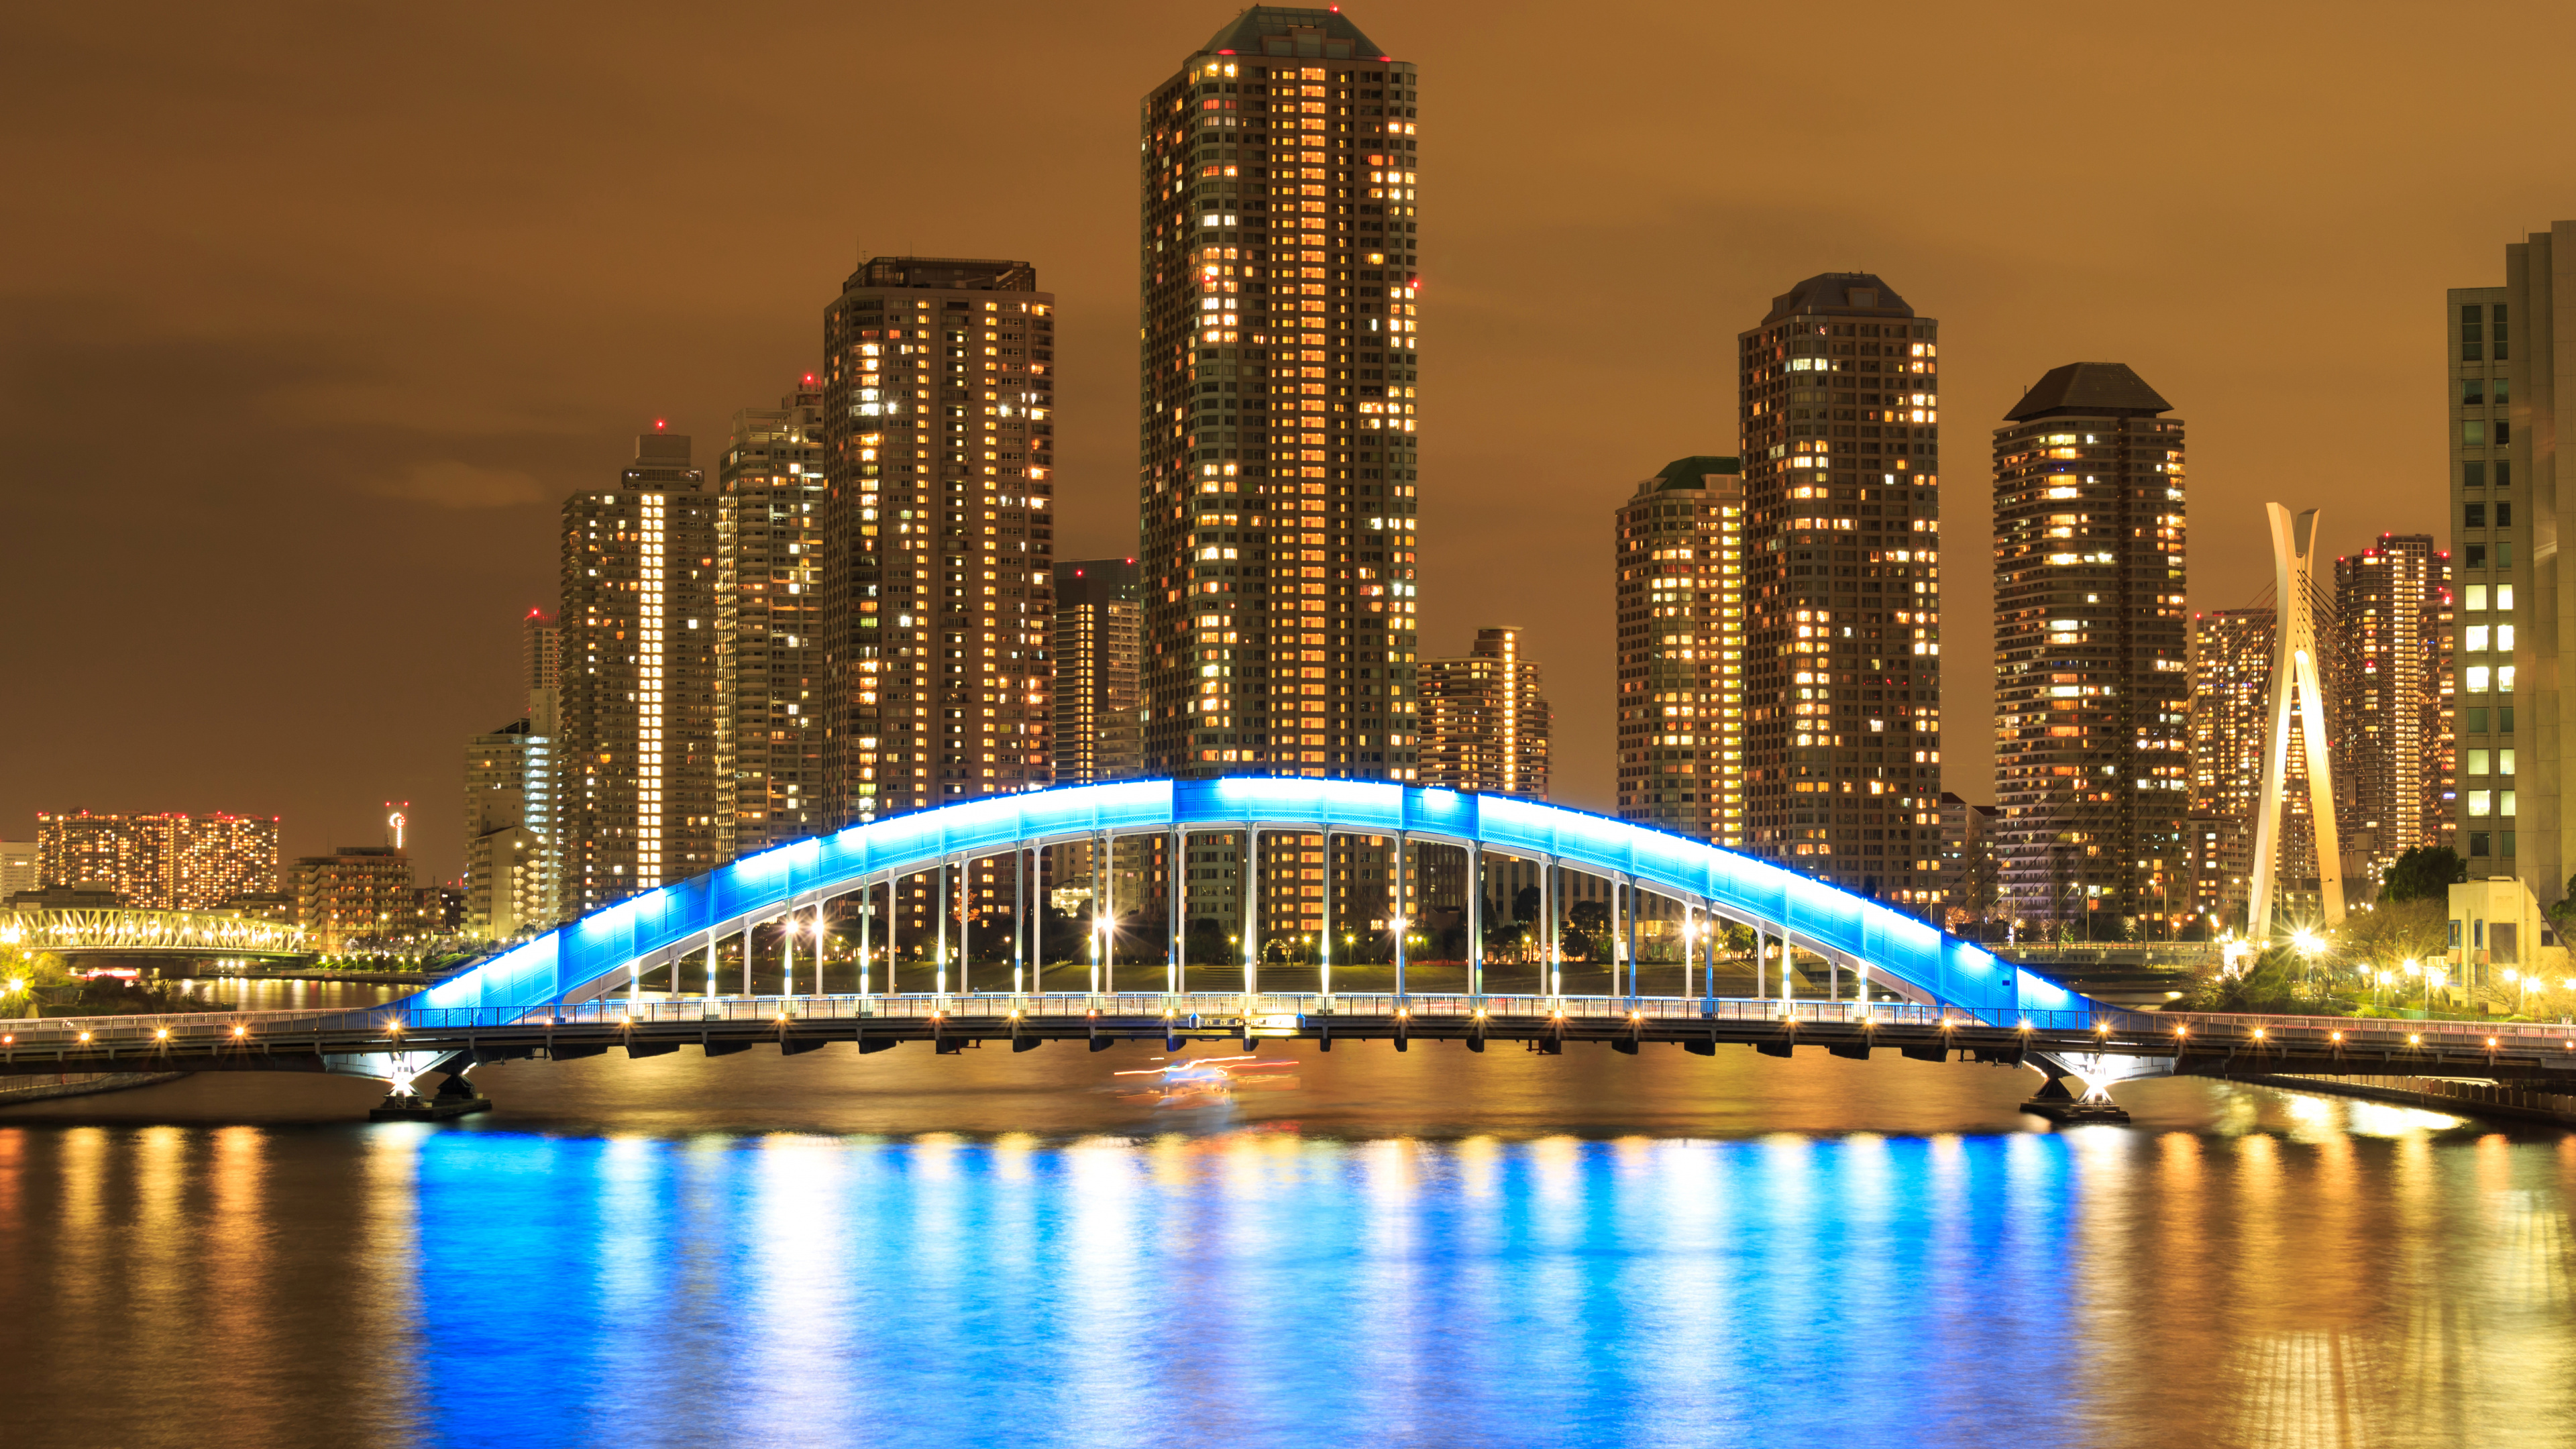 Lighted Bridge Over Body of Water Near City Buildings During Night Time. Wallpaper in 3840x2160 Resolution